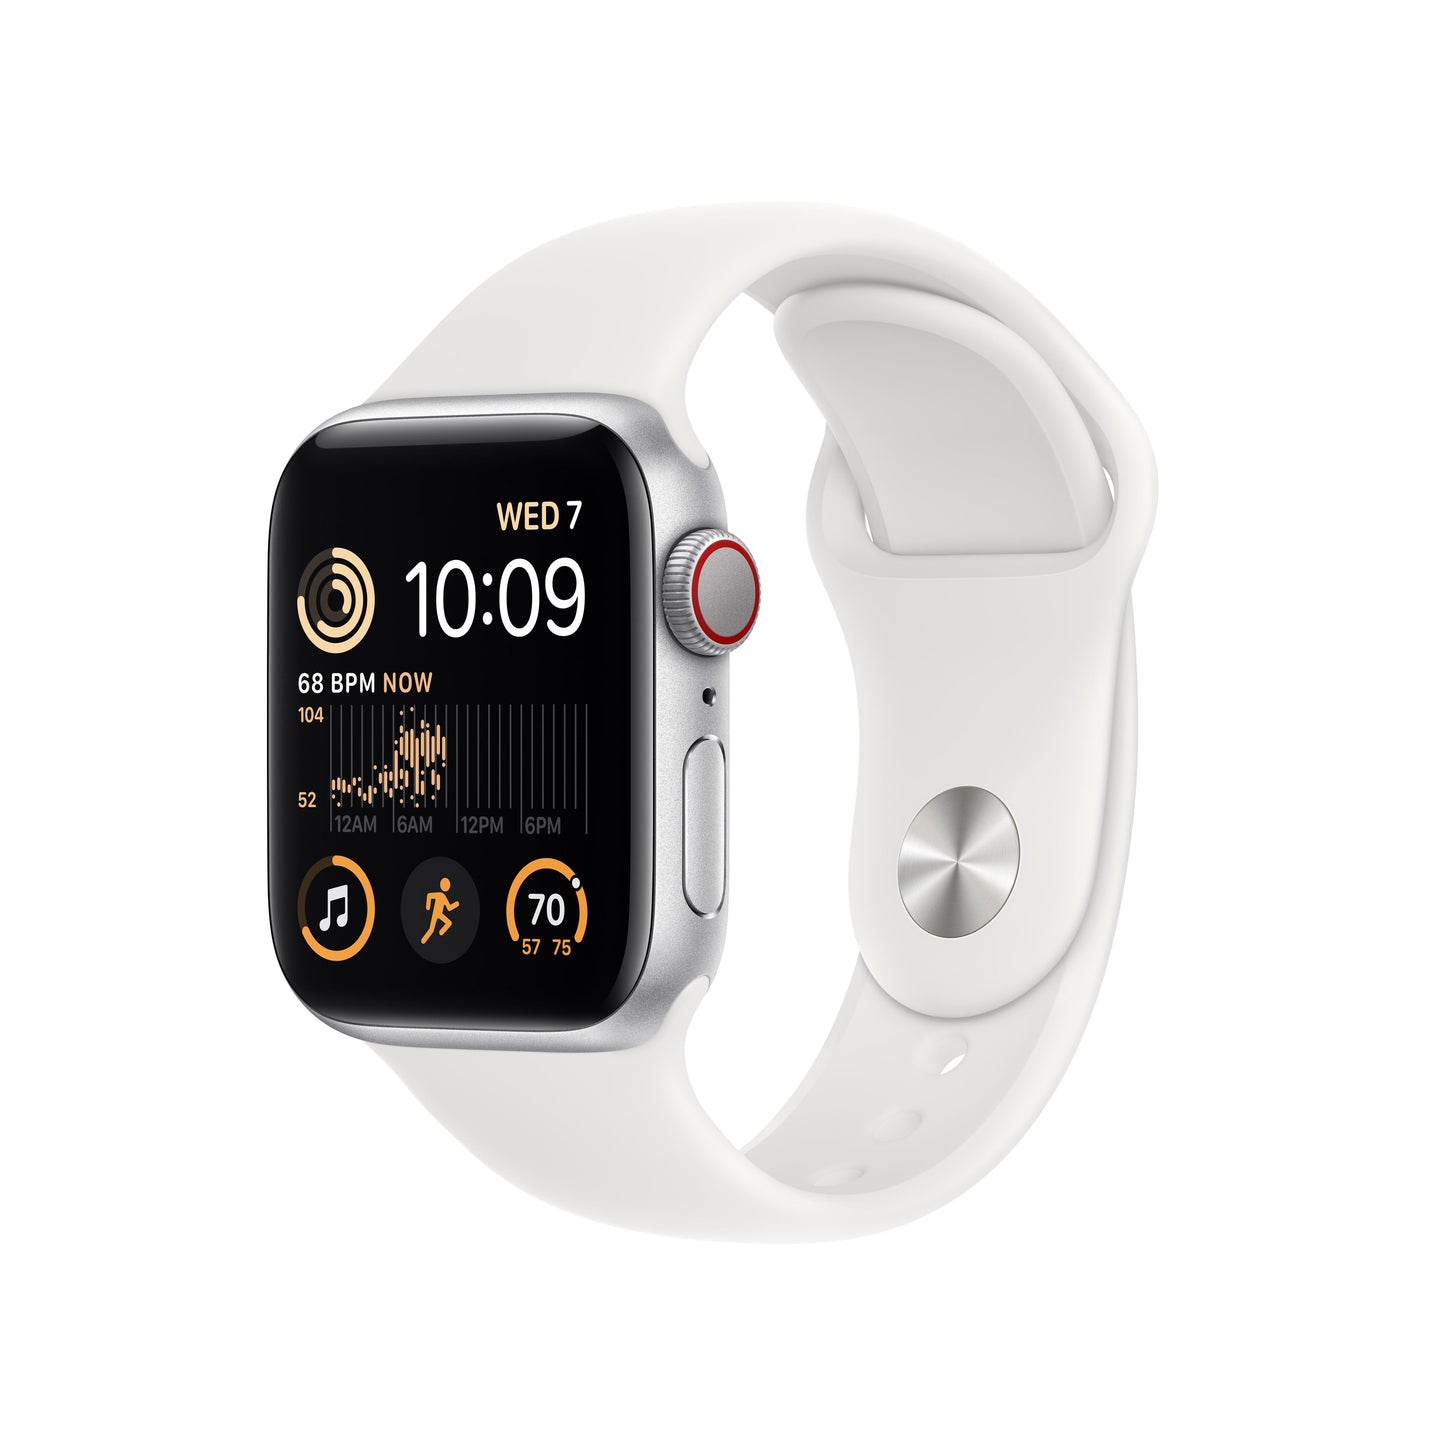 Apple Watch SE GPS + Cellular 40mm Silver Aluminium Case with White Sport Band - Regular